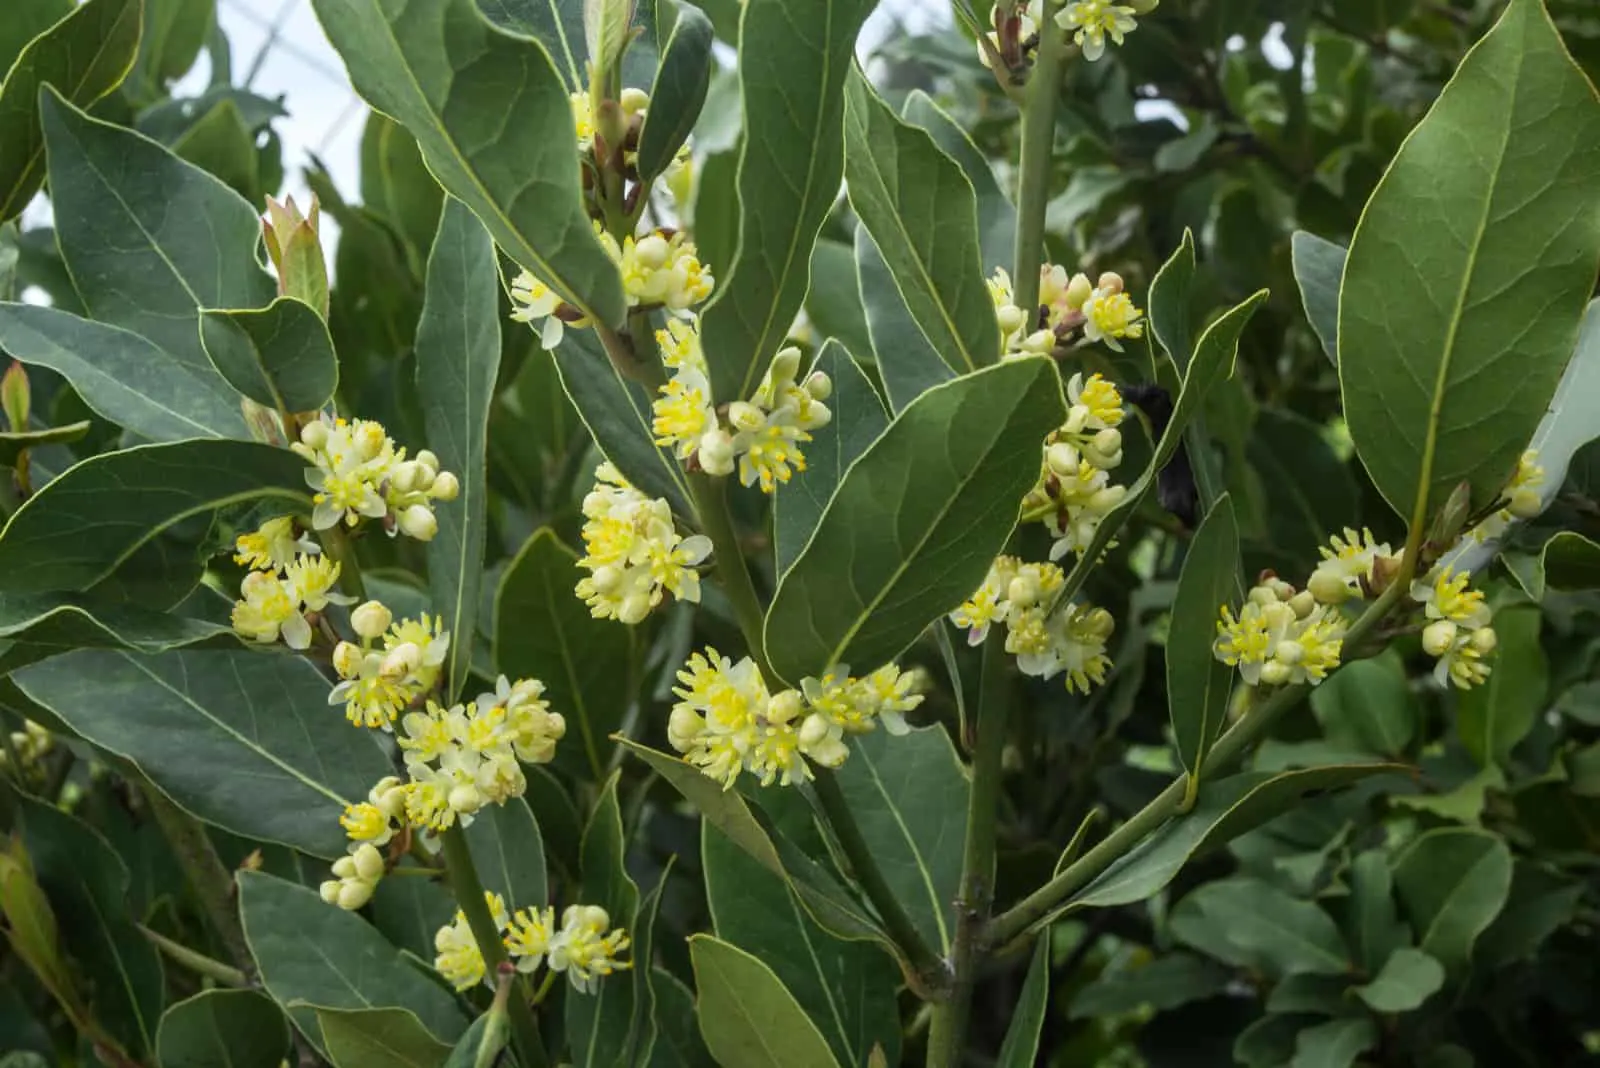 blossoms on the branches of laurel tree